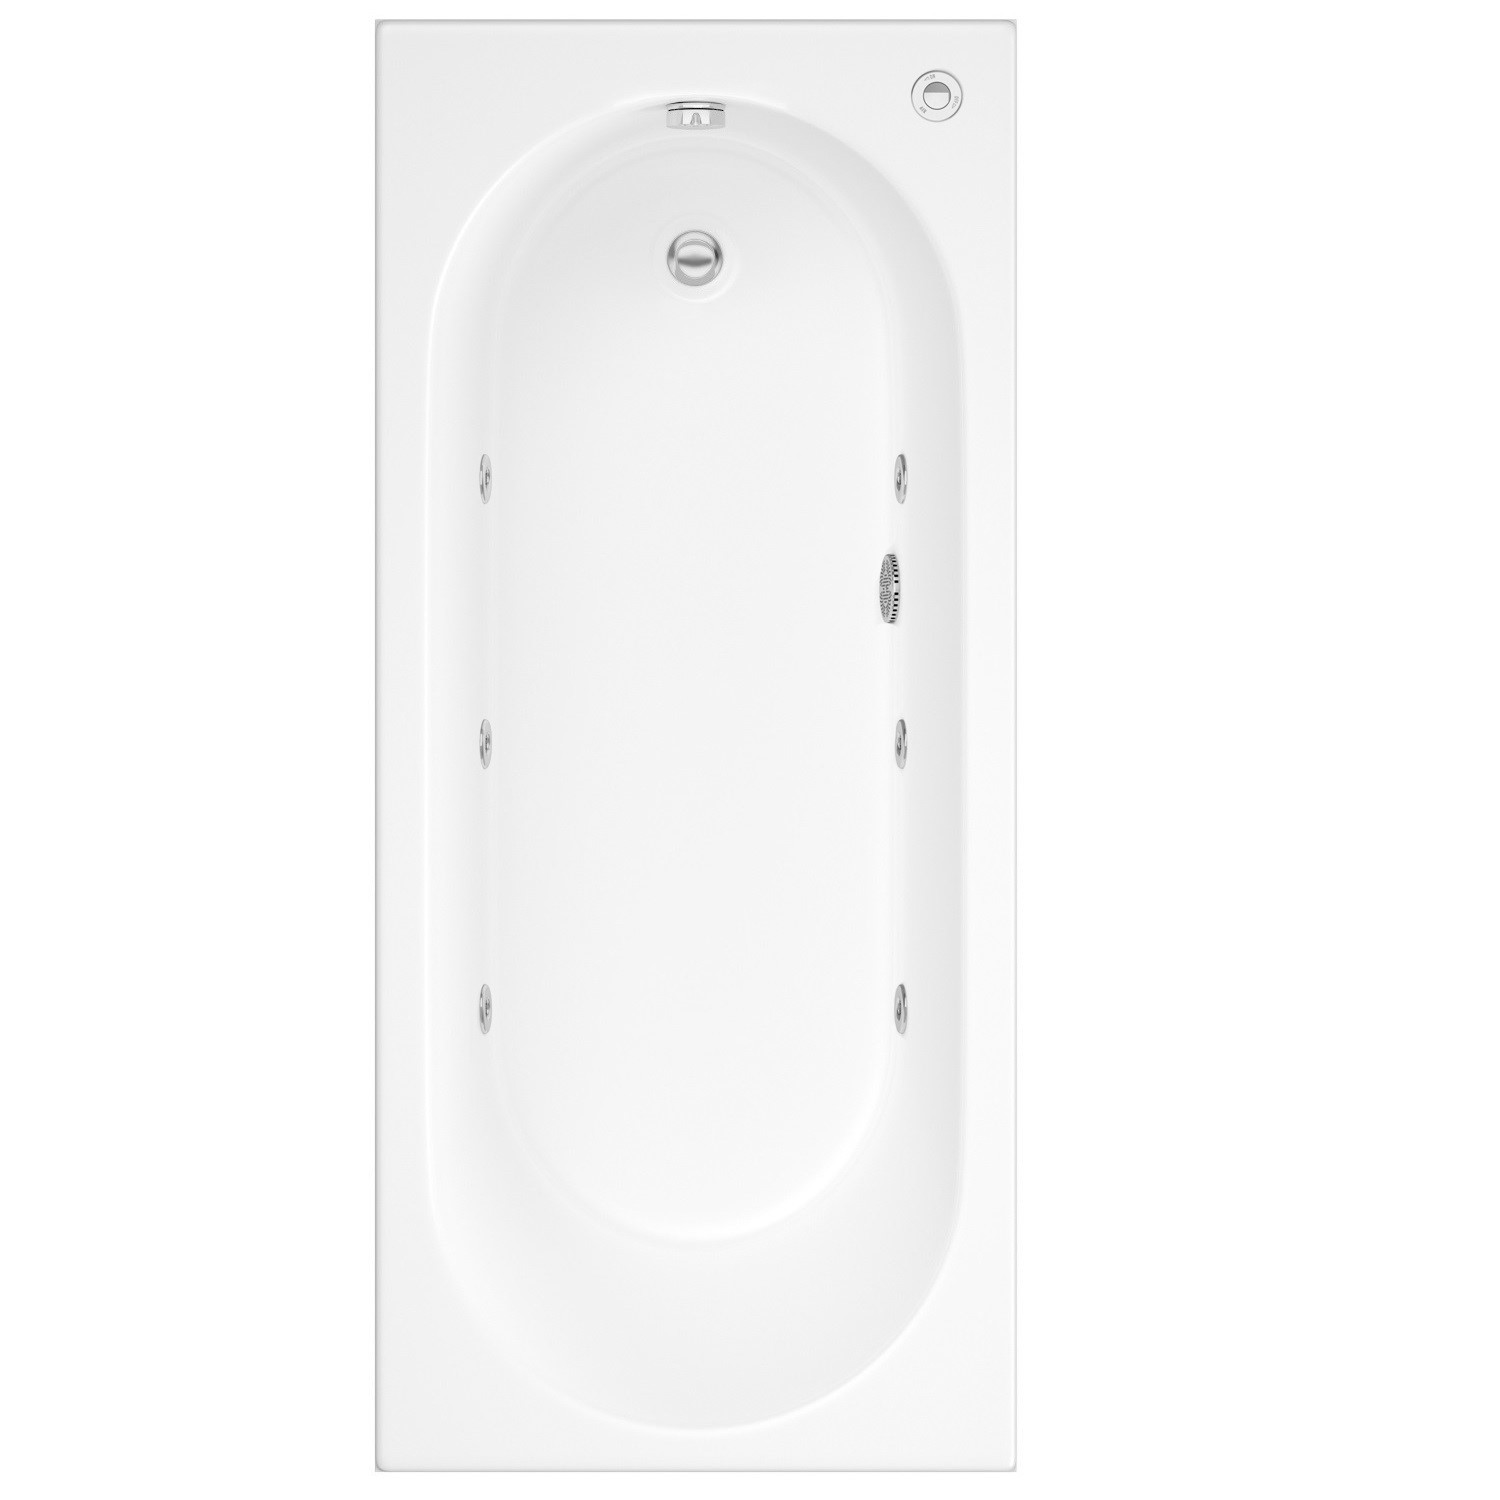 Alton Single Ended Bath with 6 Jet Whirlpool System - 1800 x 800mm